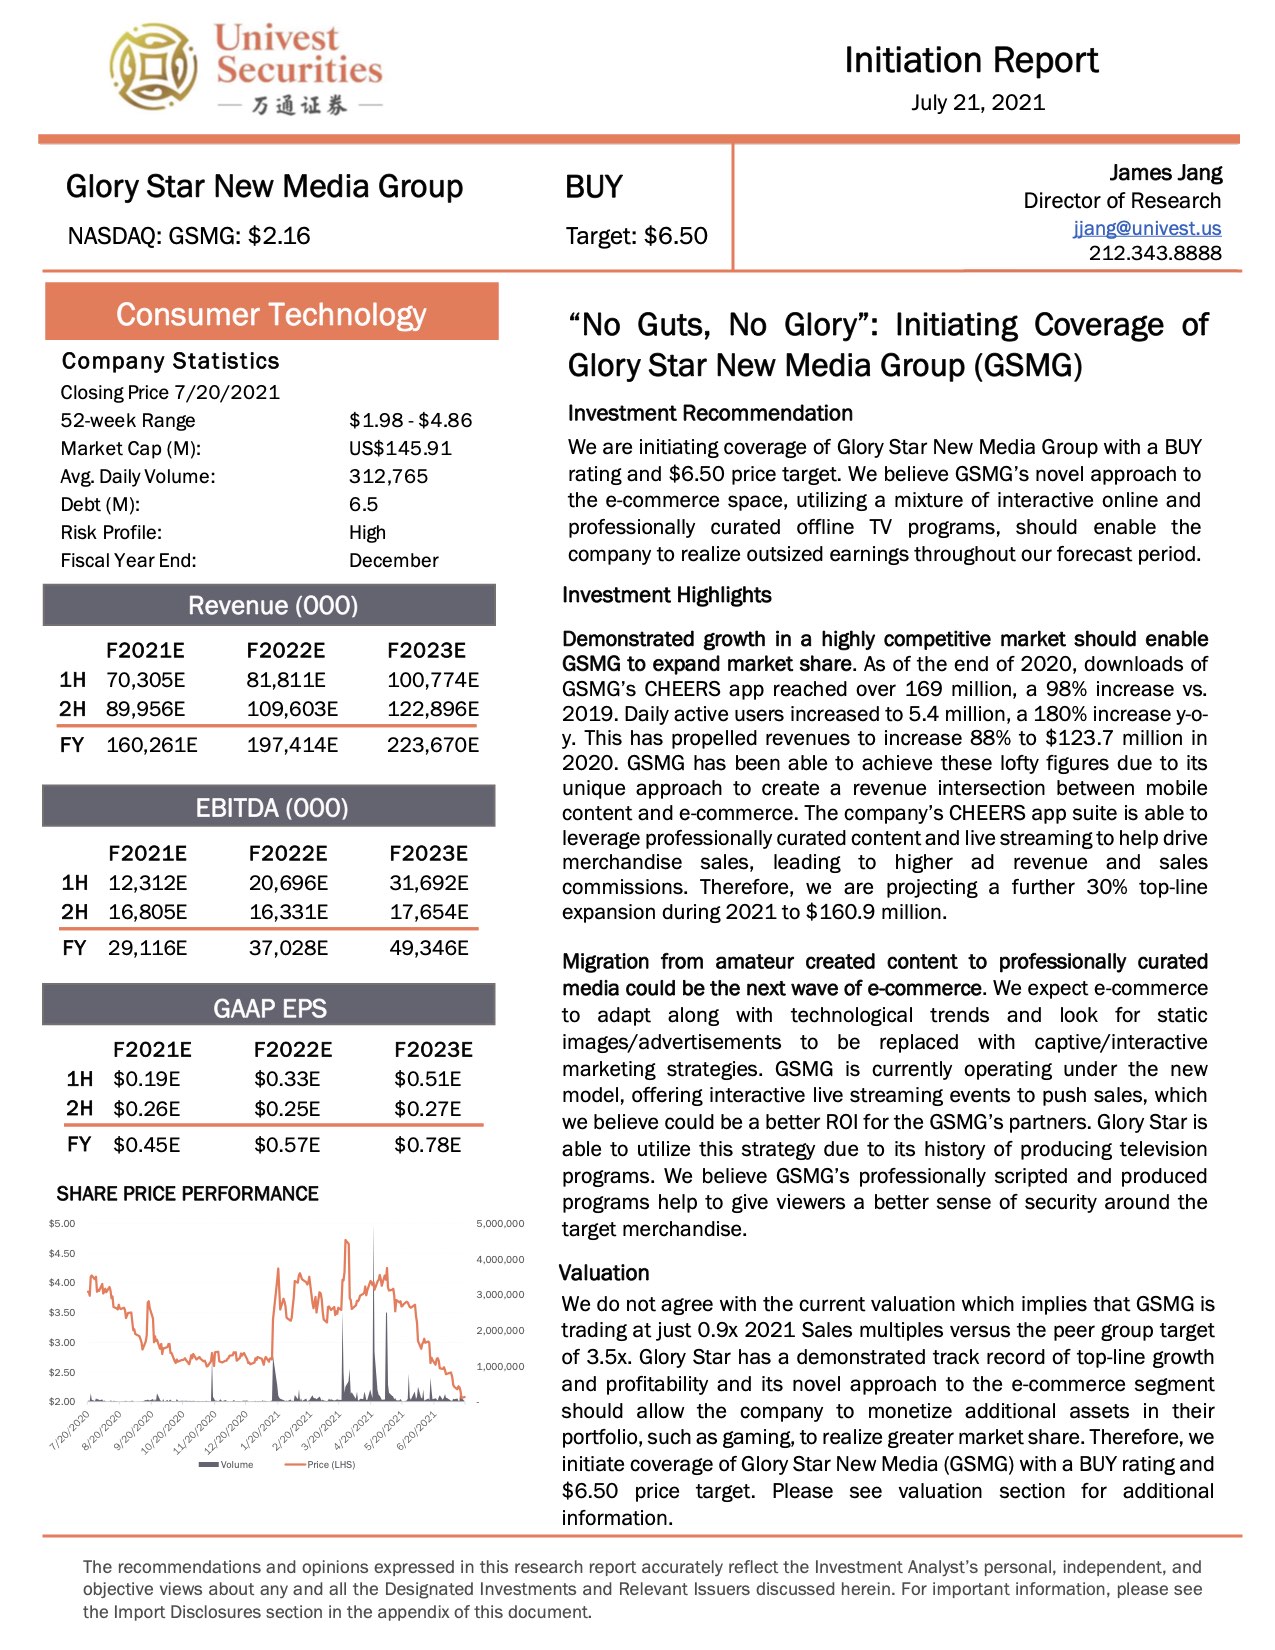 Univest Securities - Glory Star New Media (GSMG) Initiation Report(1).jpg